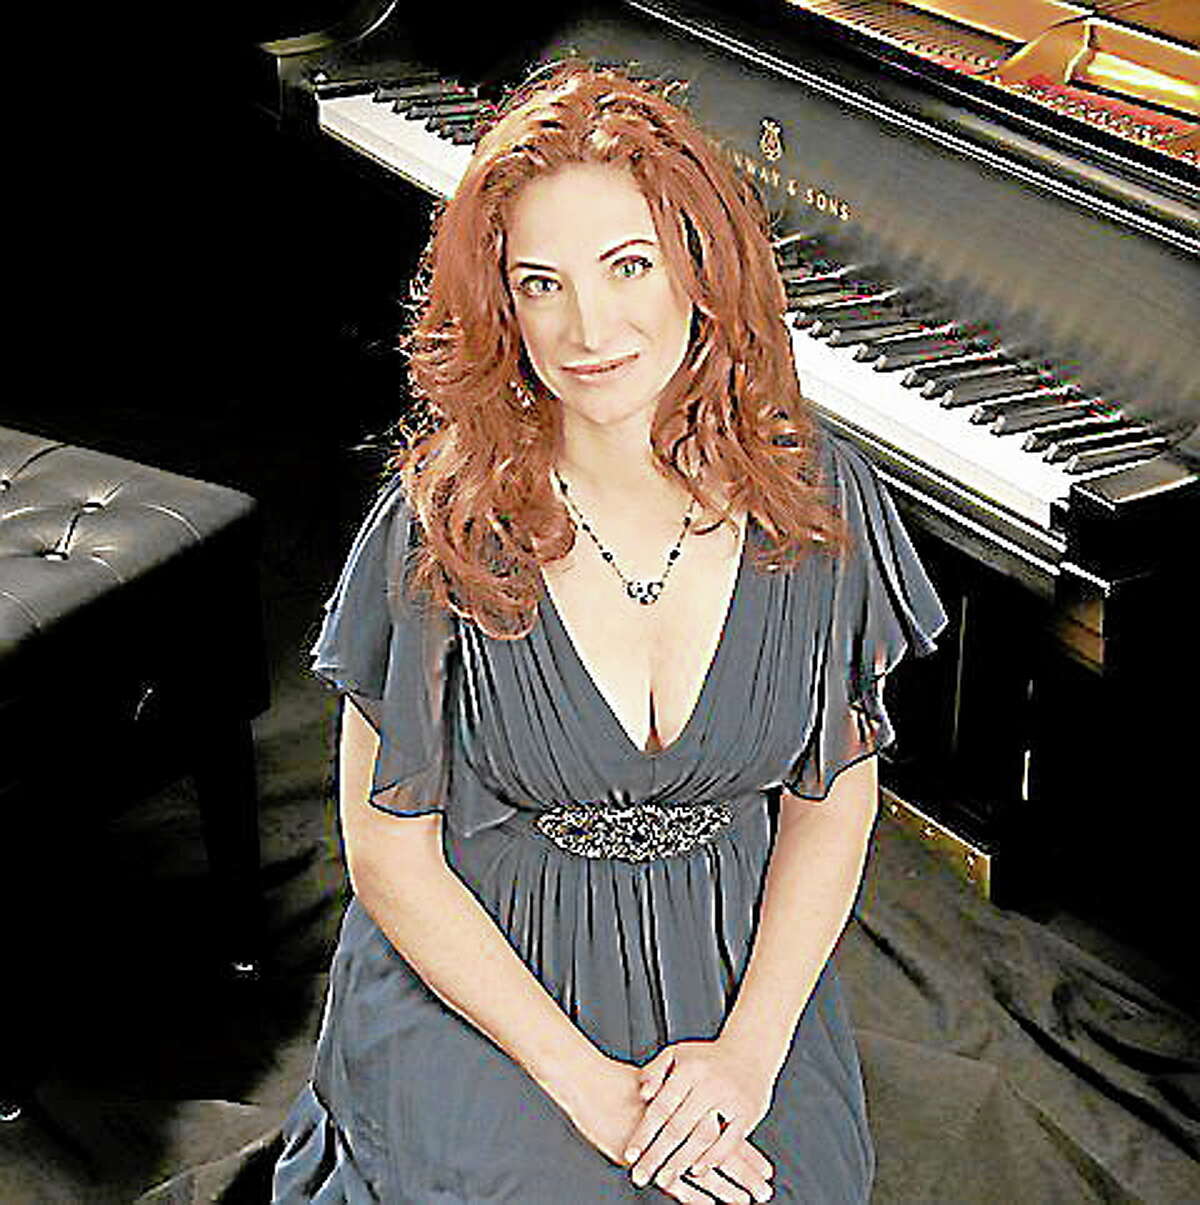 Submitted photo - Robin SpielbergPianist Robin Spielberg.